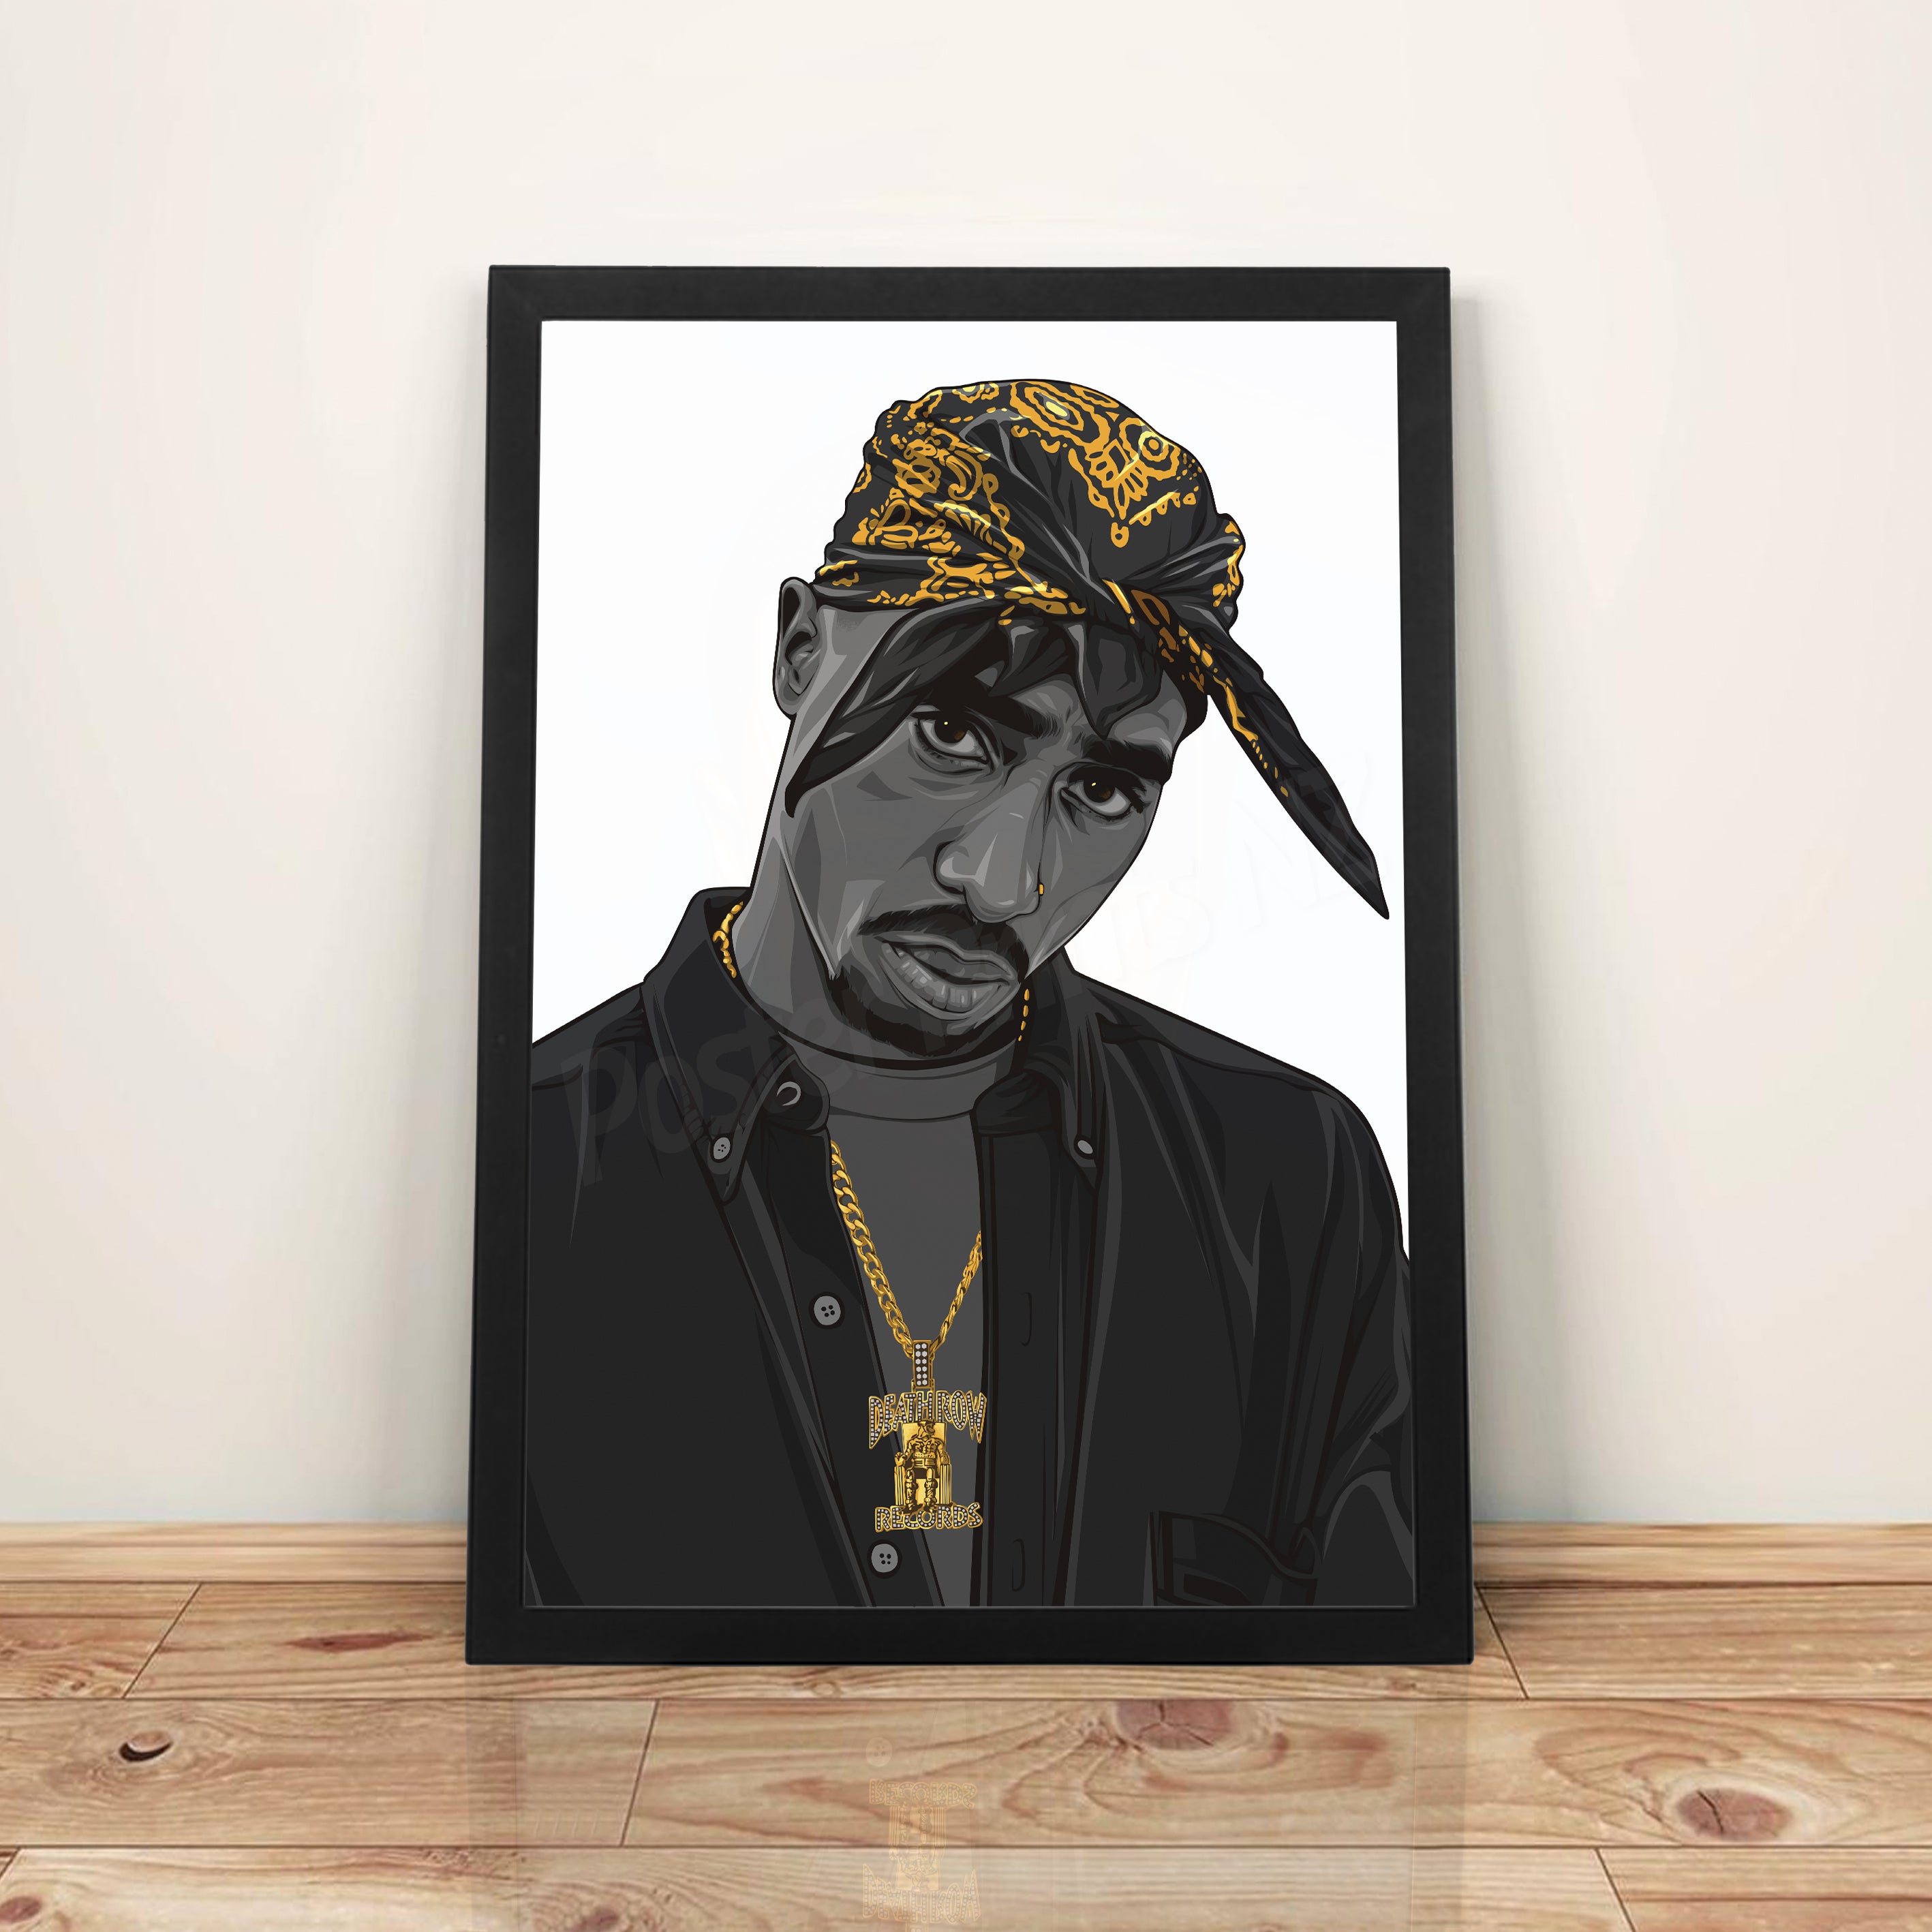 Tupac 'Gold Edition' - A3 Framed Art Poster